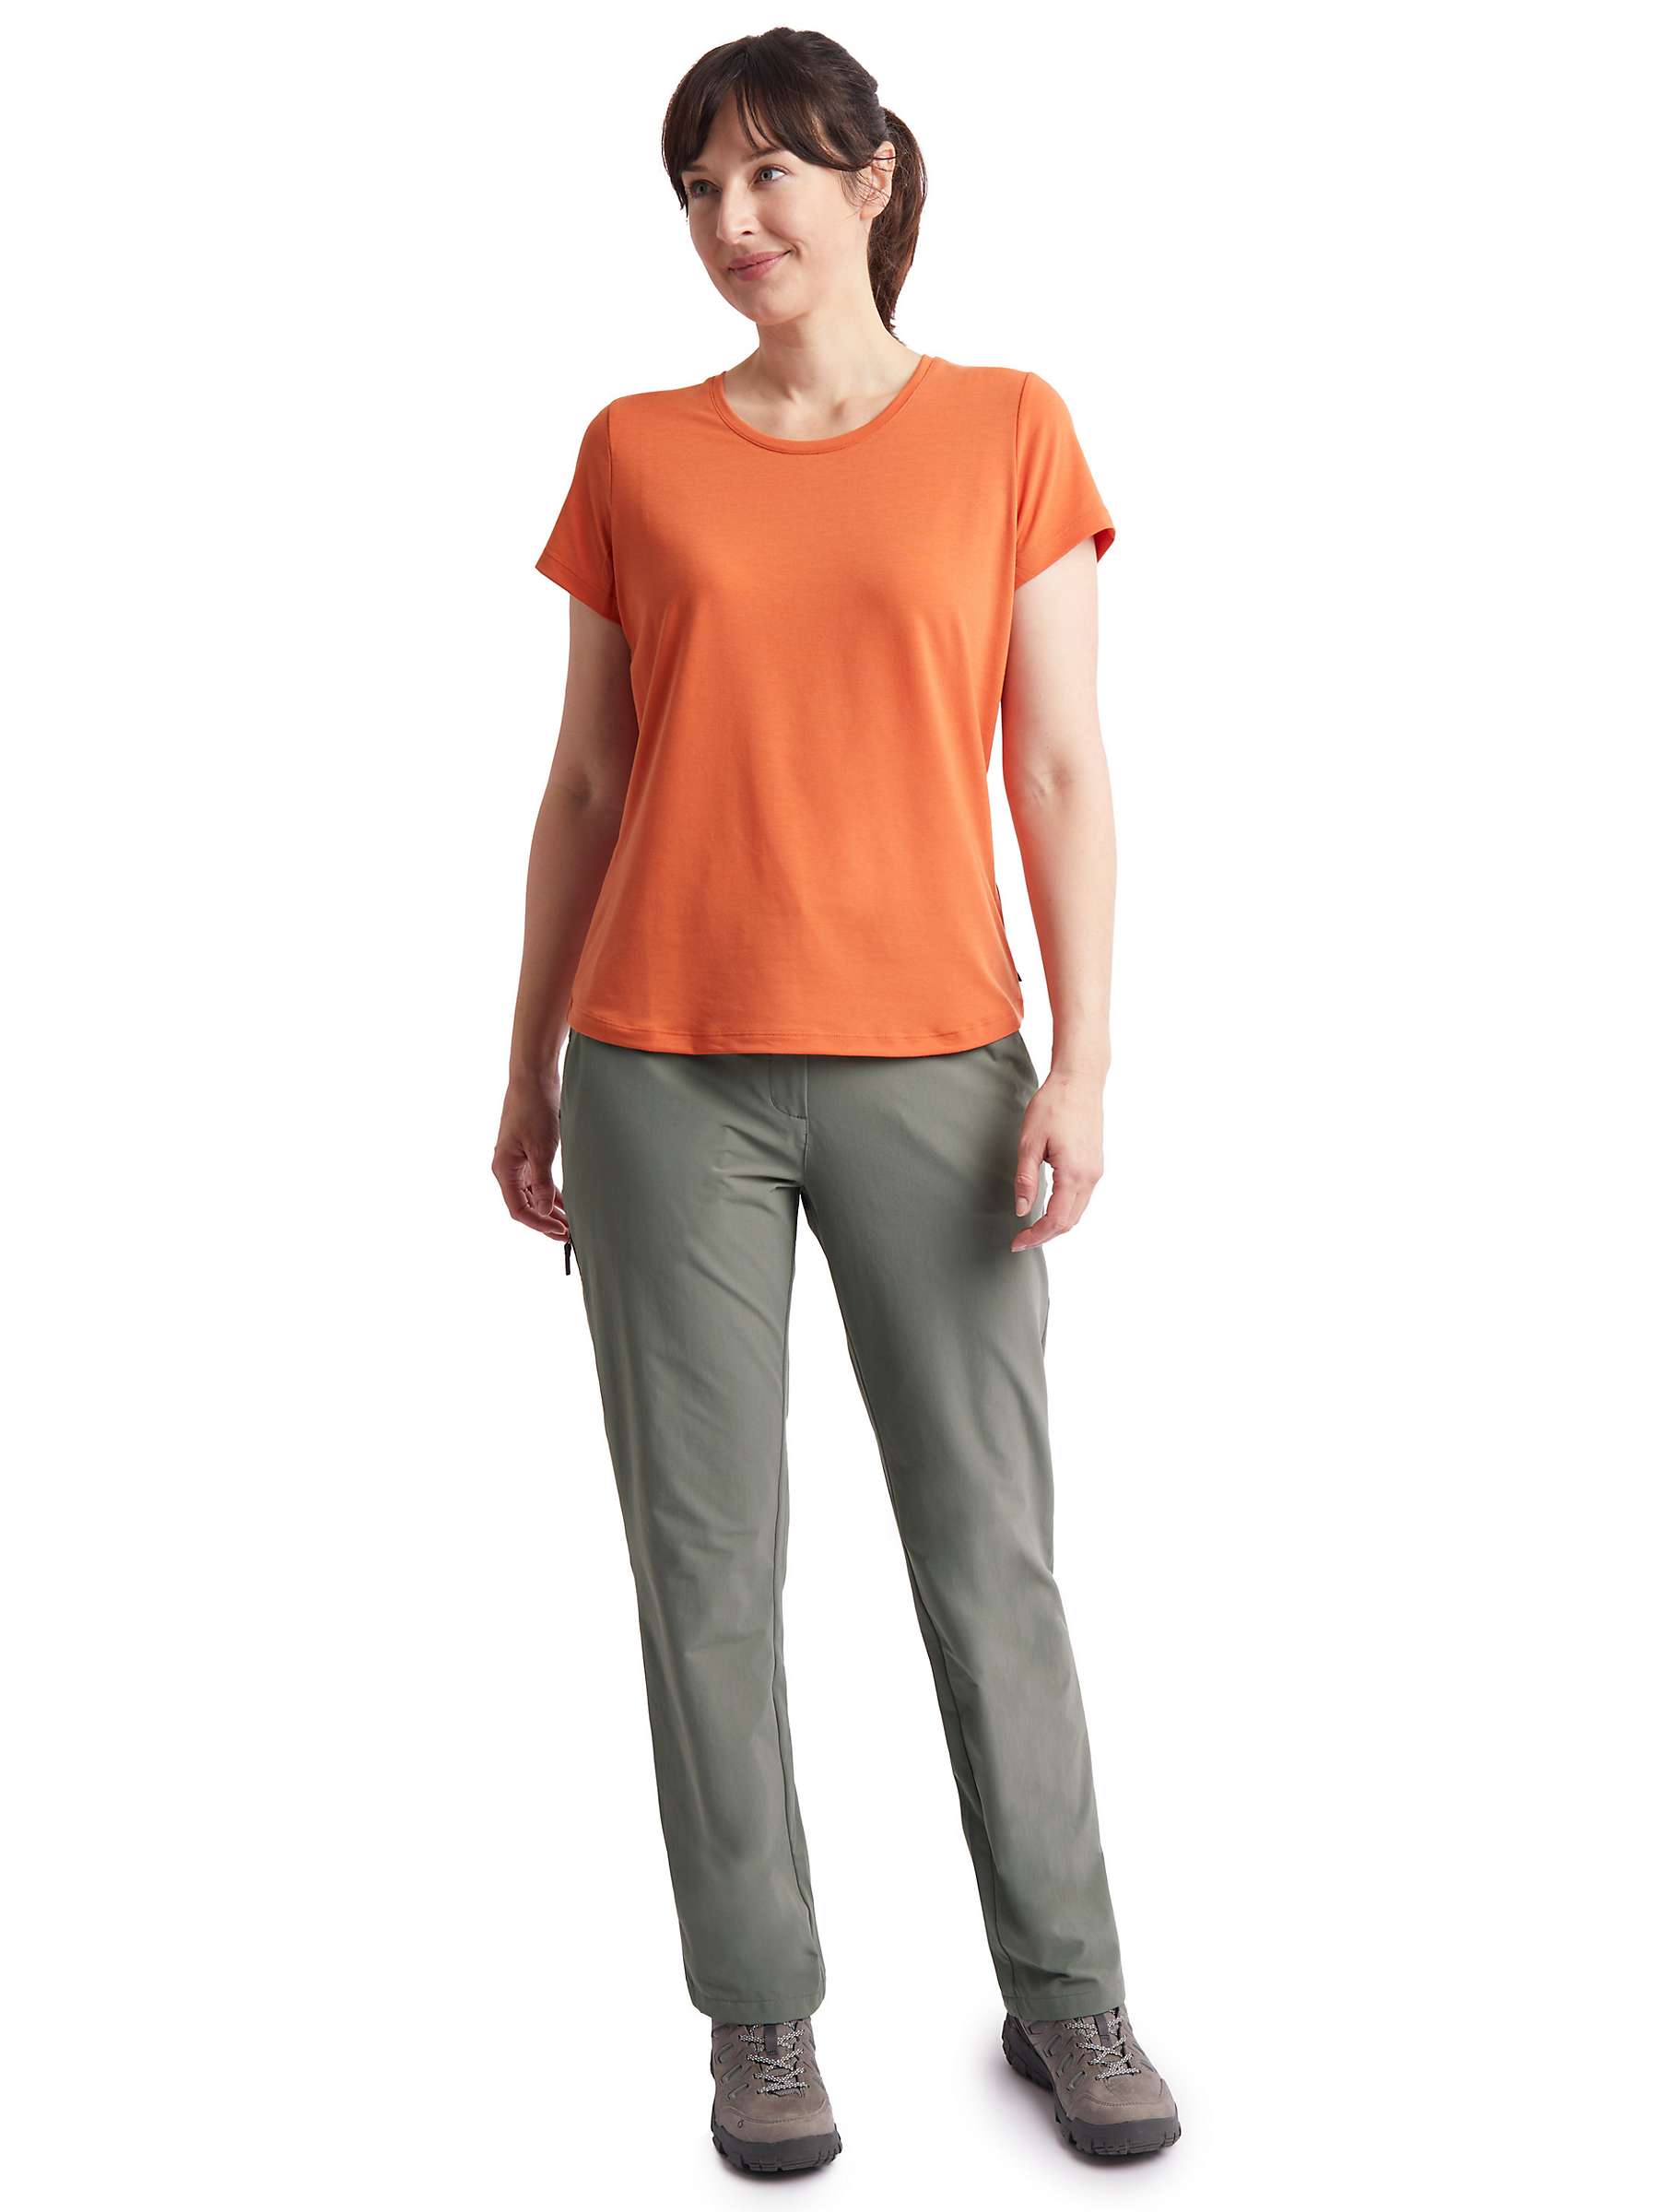 Buy Rohan Roamers Stretch Walking Trousers Online at johnlewis.com